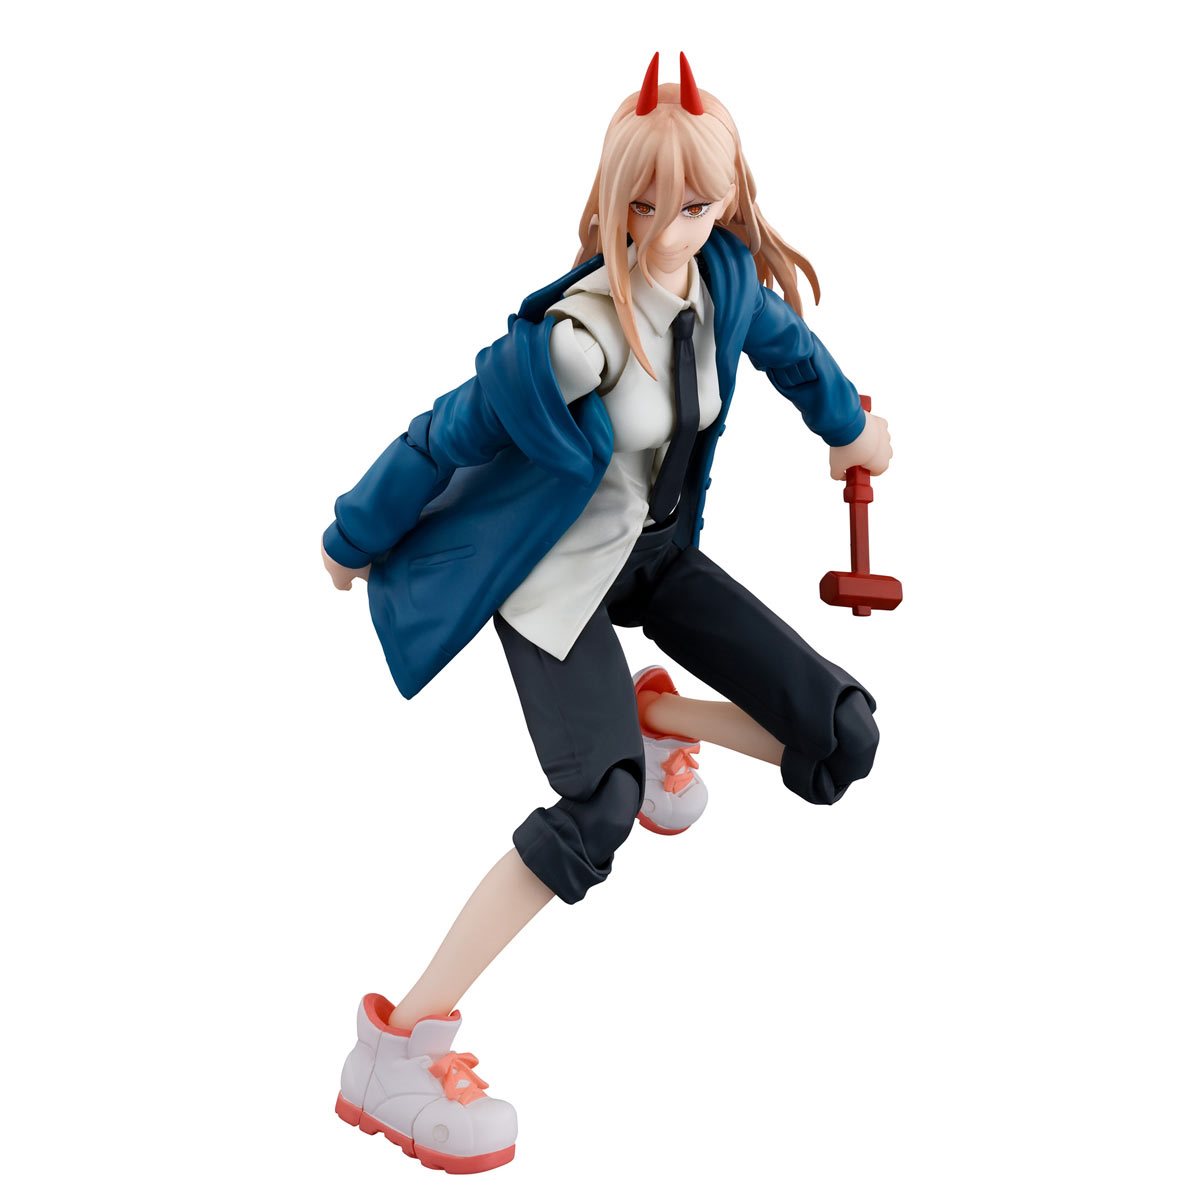 ANIME HEROES - Chainsaw Man - Chainsaw Man Action Figure